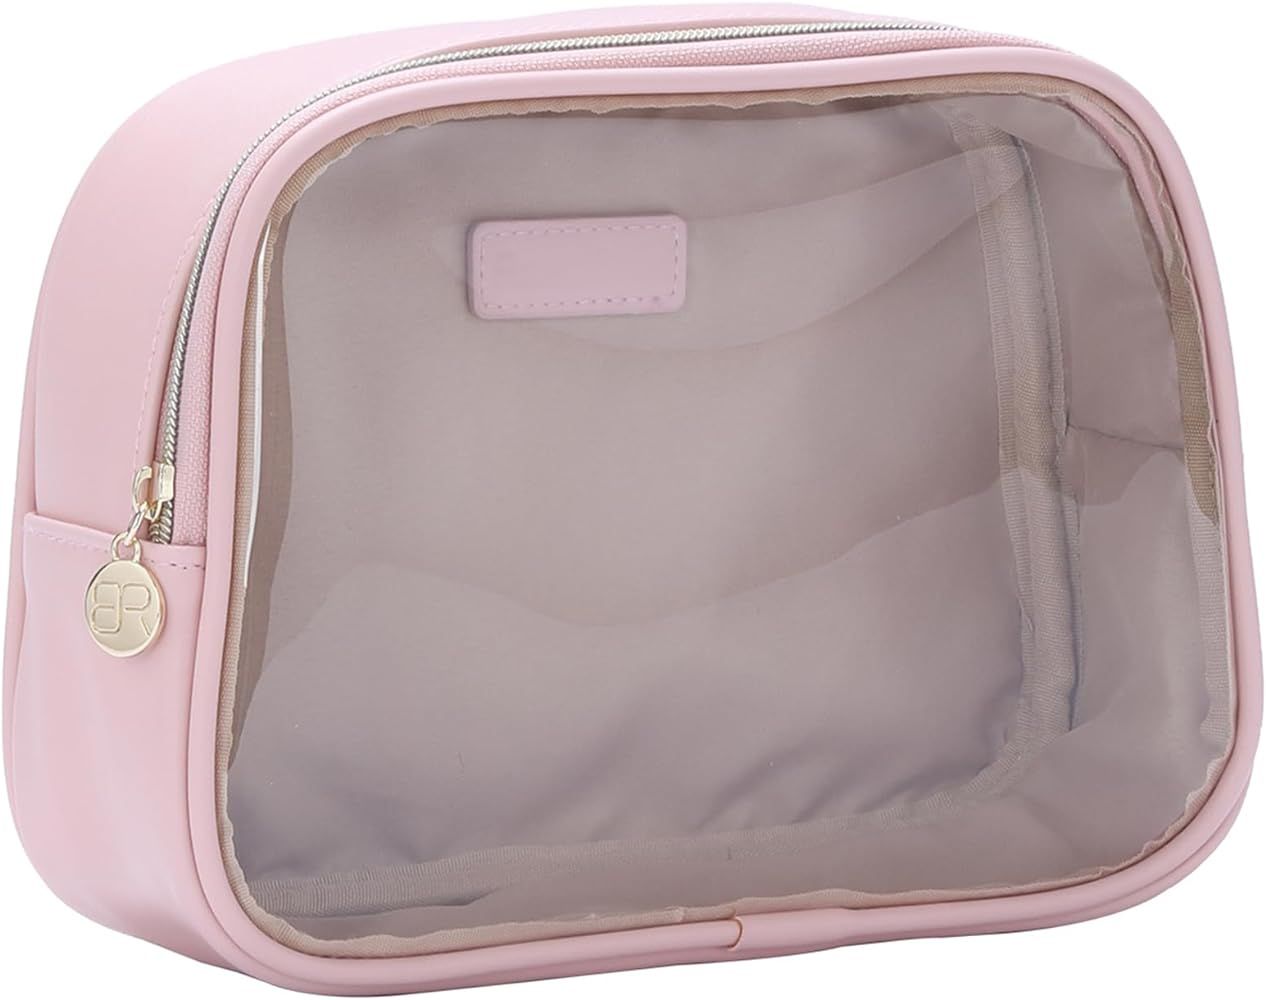 Clear Makeup Bag for Purse,Travel Cosmetic Bag for Girls, Organizer Bag for Accessories Pink | Amazon (US)